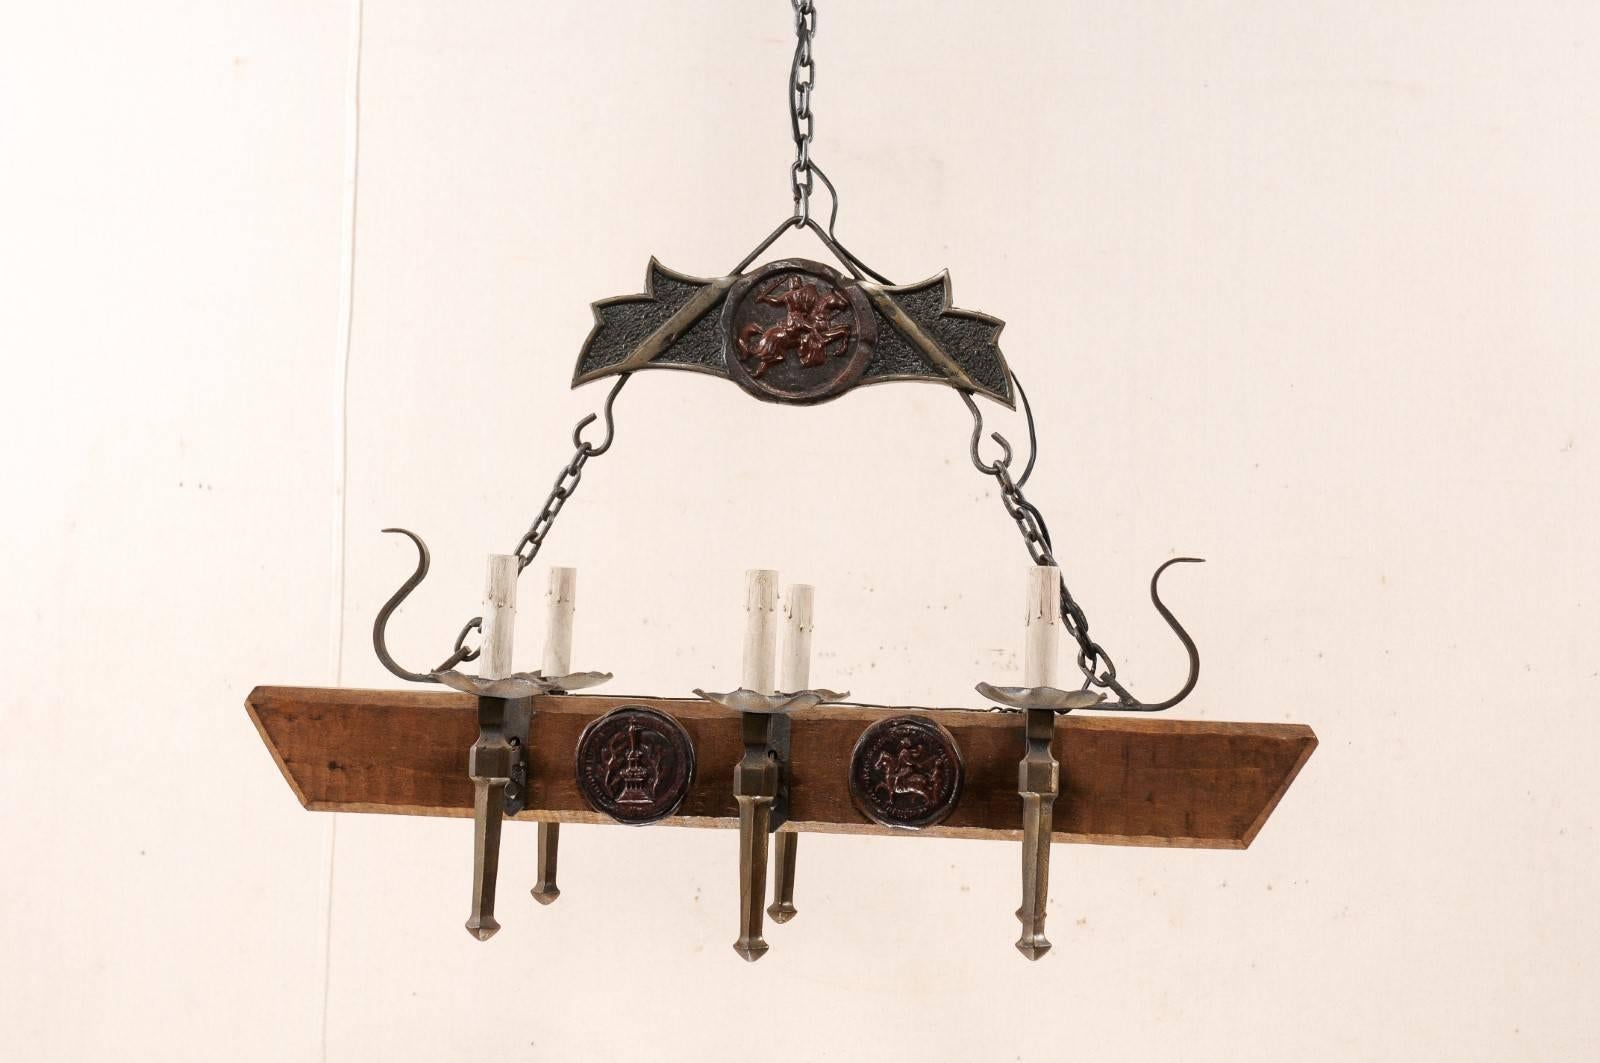 A French vintage, rectangular-shaped, forged-iron and wood beam six-light chandelier. This French mid-20th century chandelier features a central horizontal wood beam with six torch style iron arms, three projecting out along each side, of which